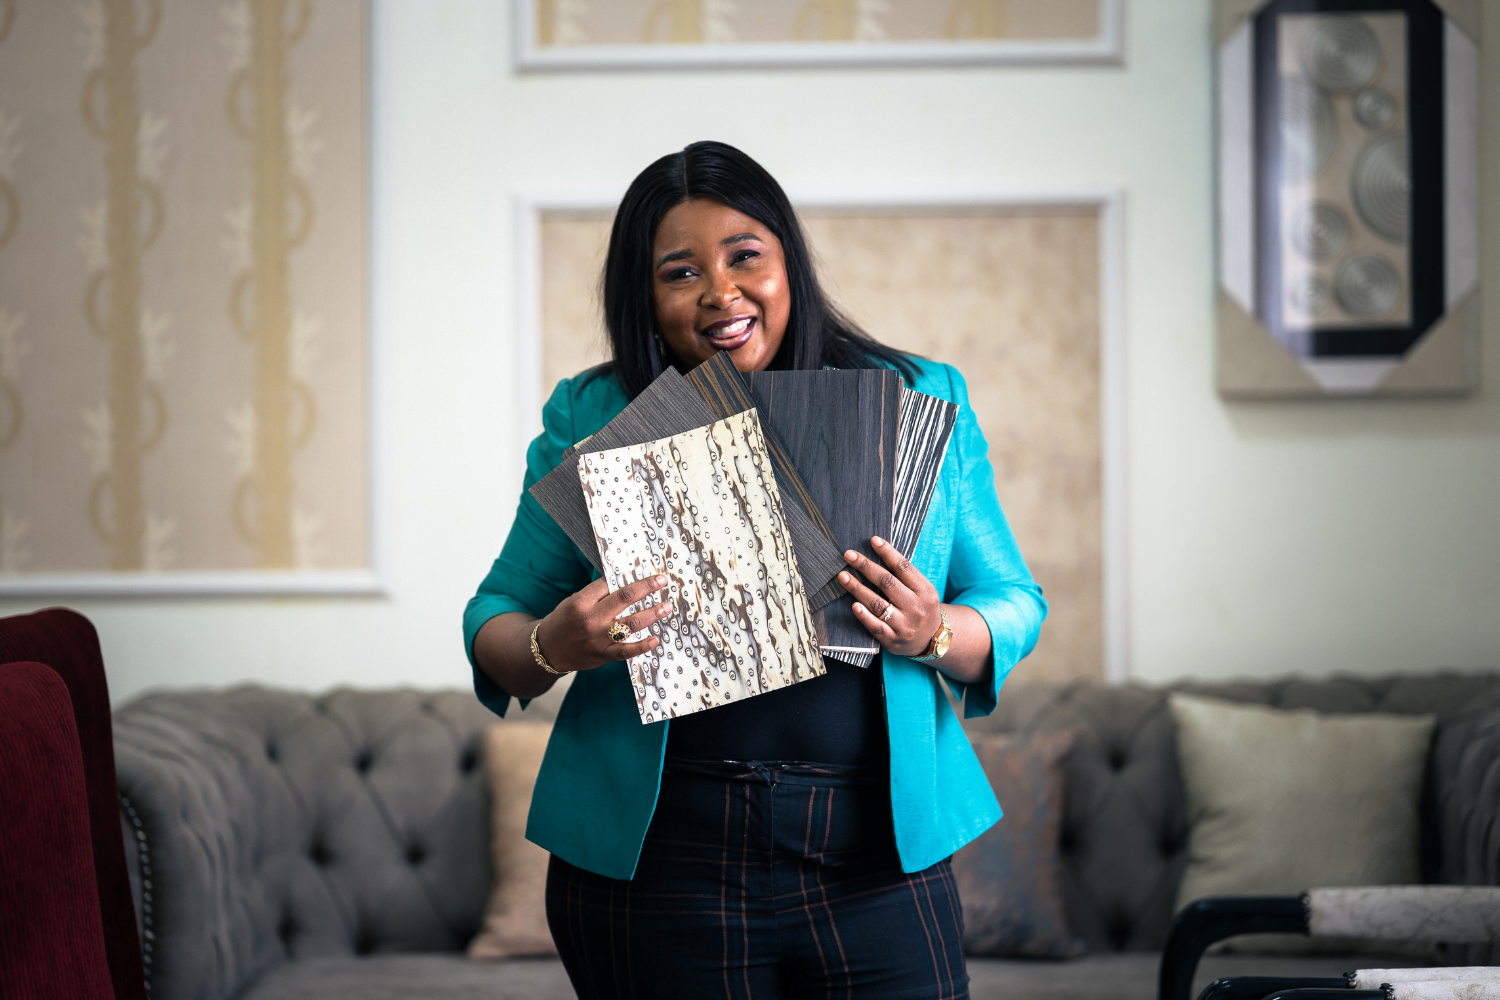 Glory Omoregie, CEO of Home Craft Interiors and Projects in Lagos, Nigeria holds up wood flooring samples.